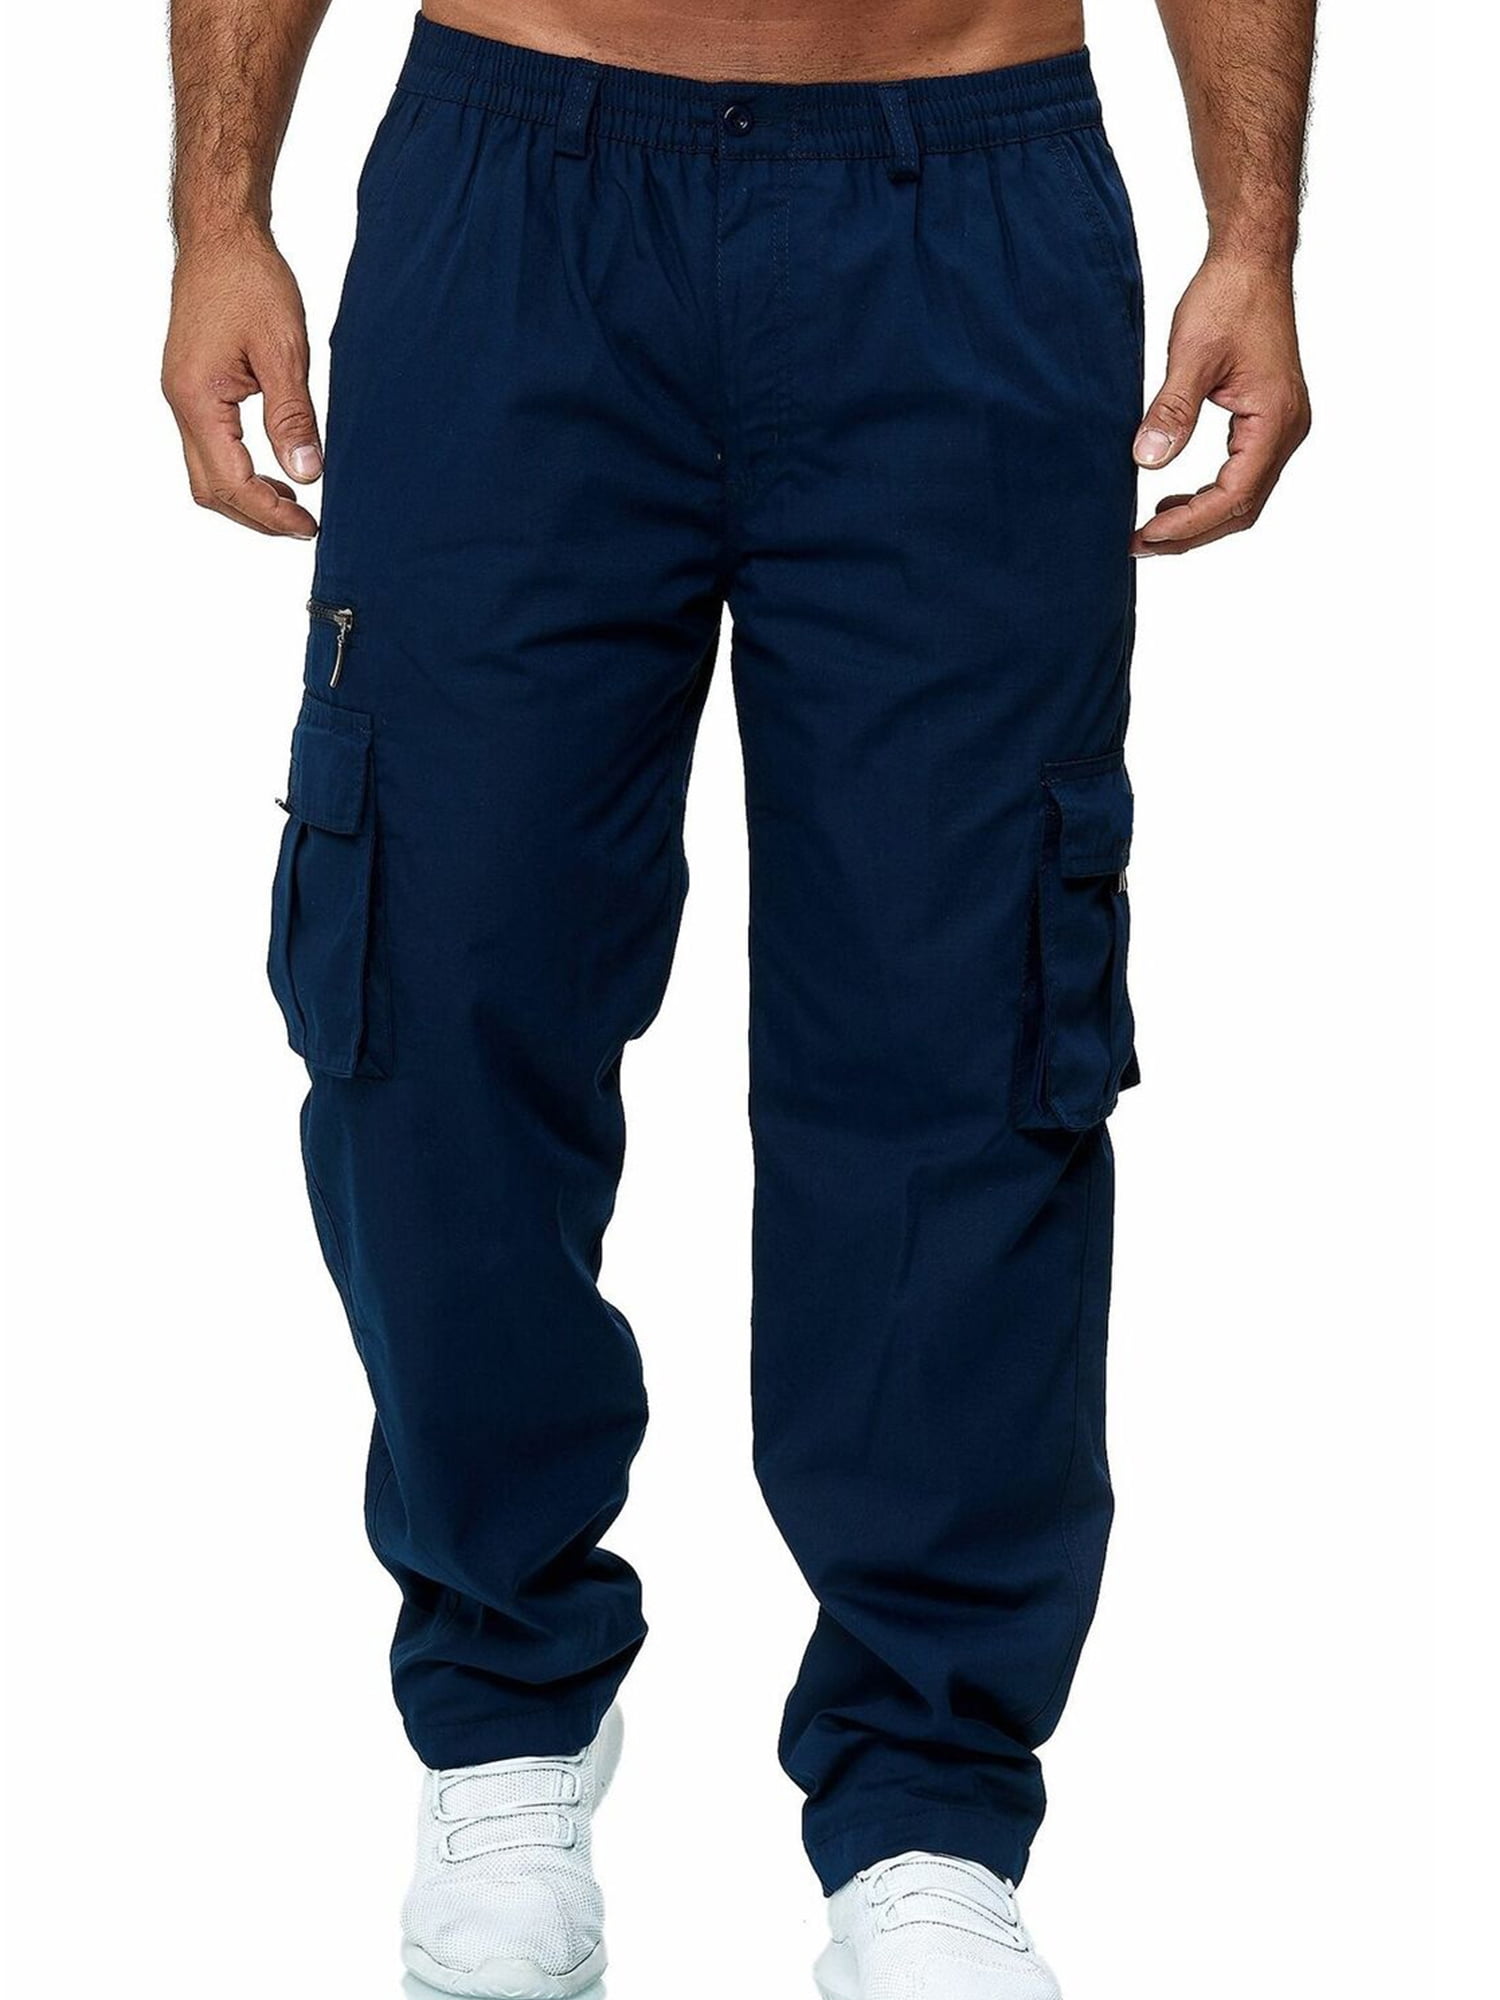 Cindysus Cargo Pants for Men Solid Casual Pants Multiple Pockets ...